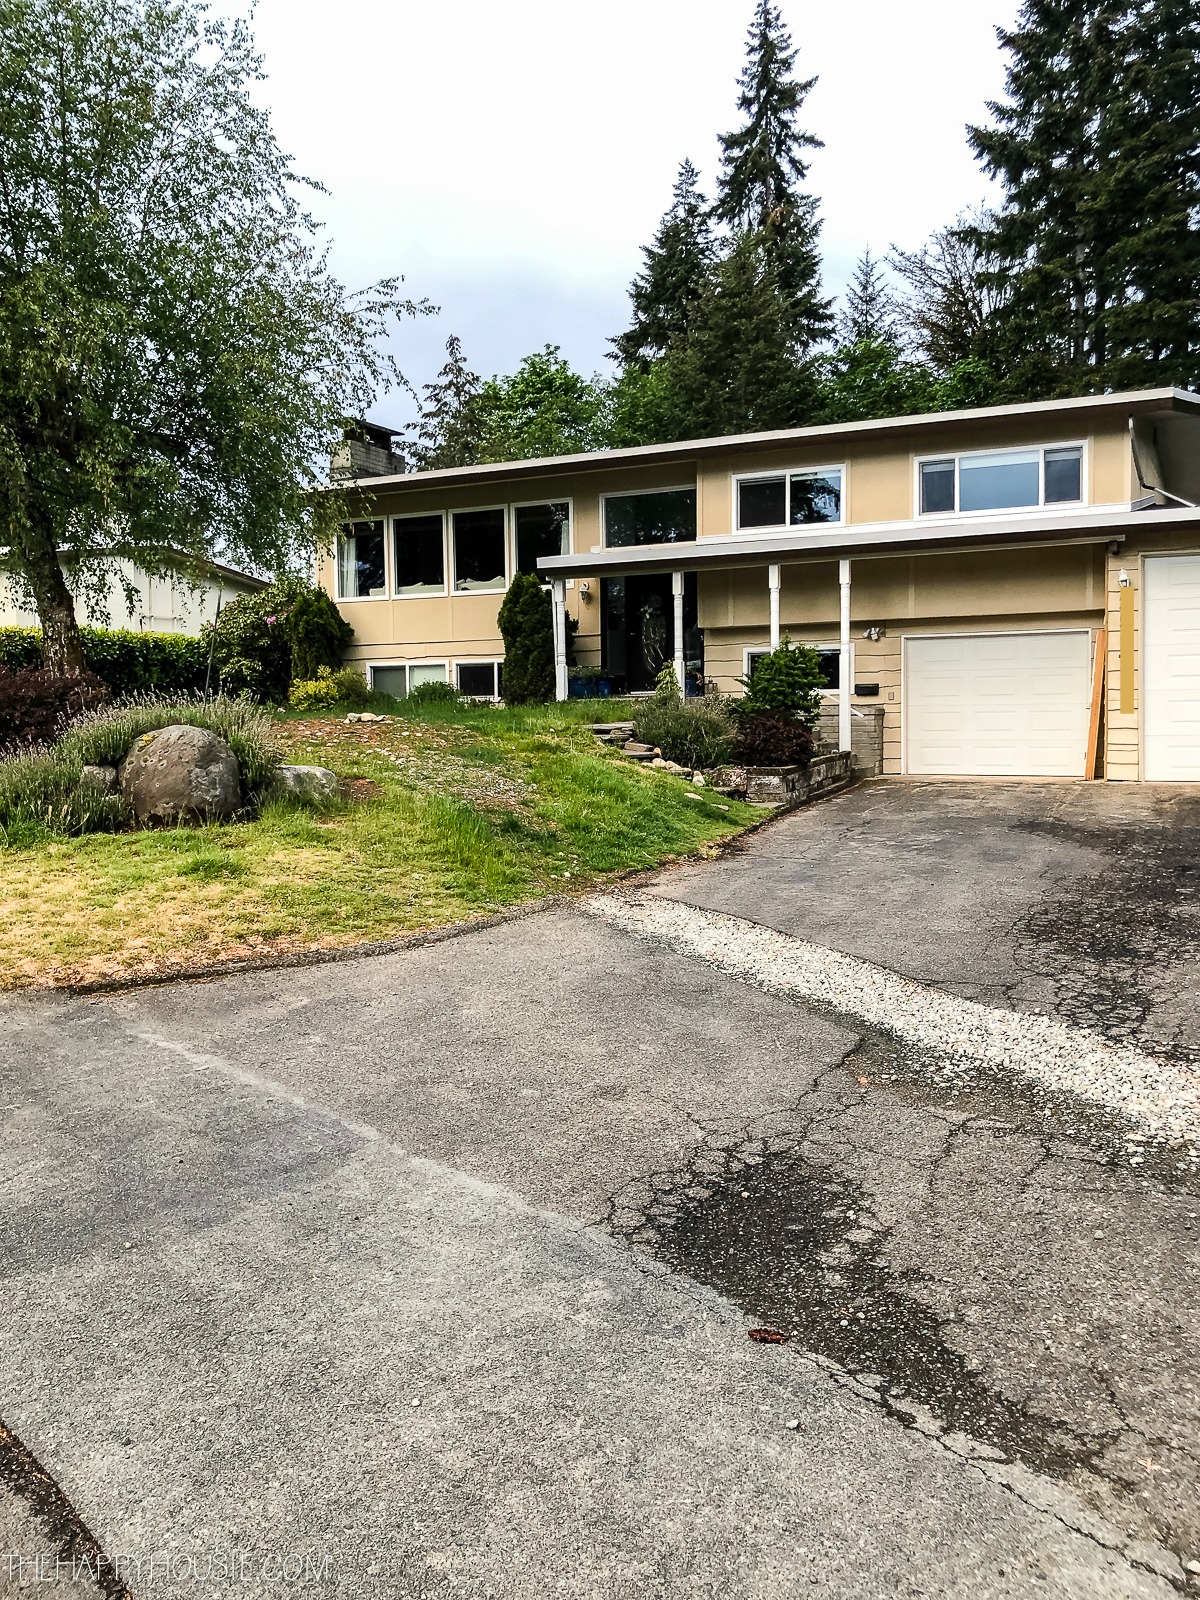 A split level home with a damaged driveway.